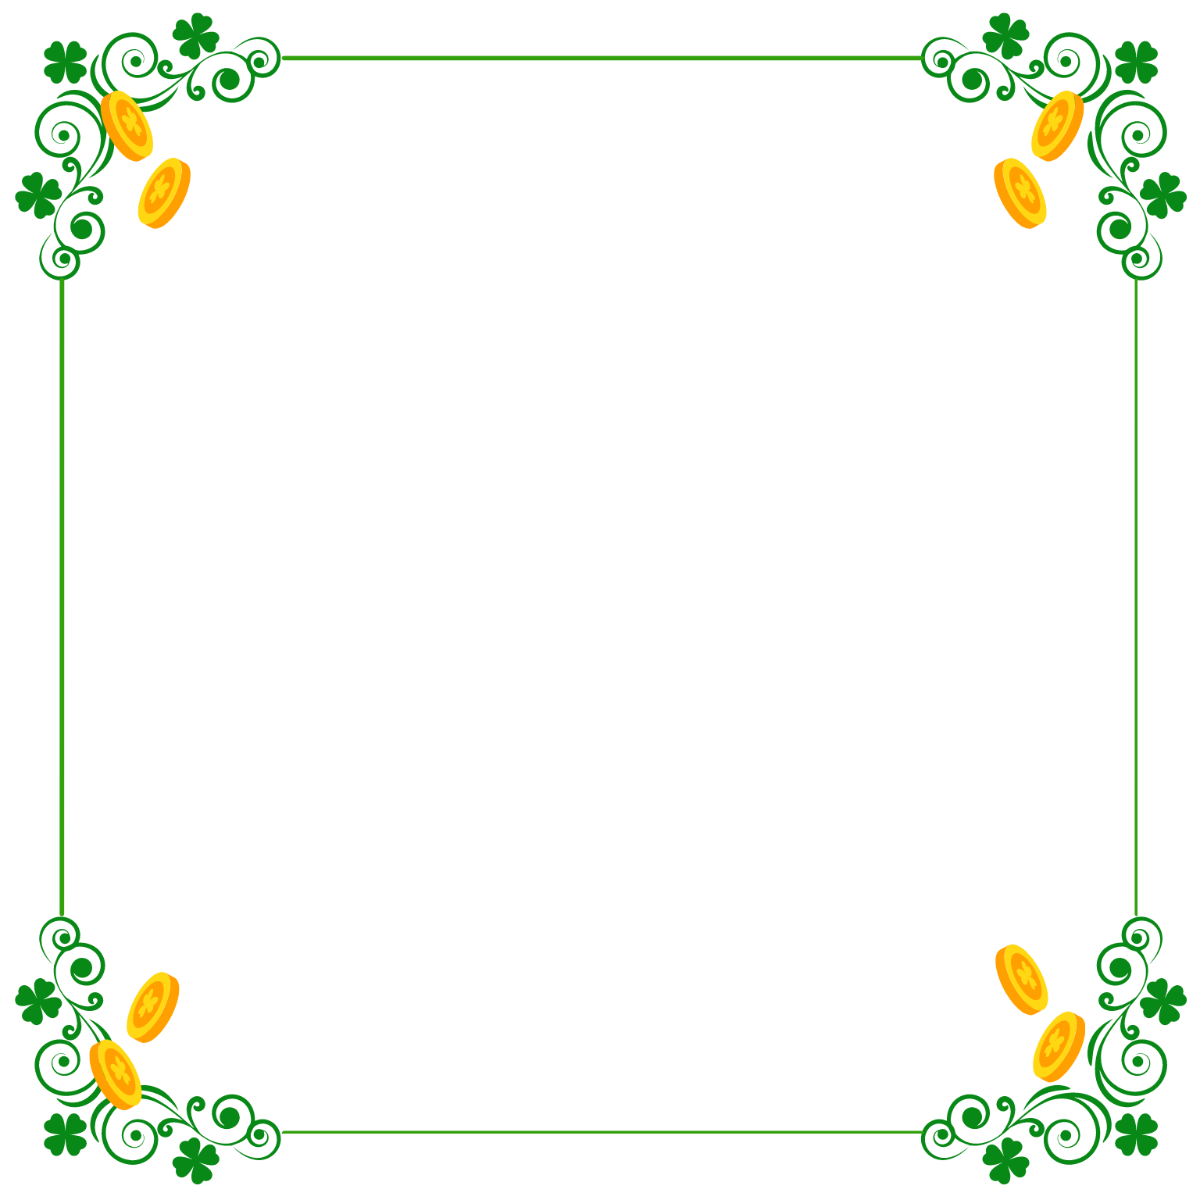 St. Patrick's Day Border Vector Template